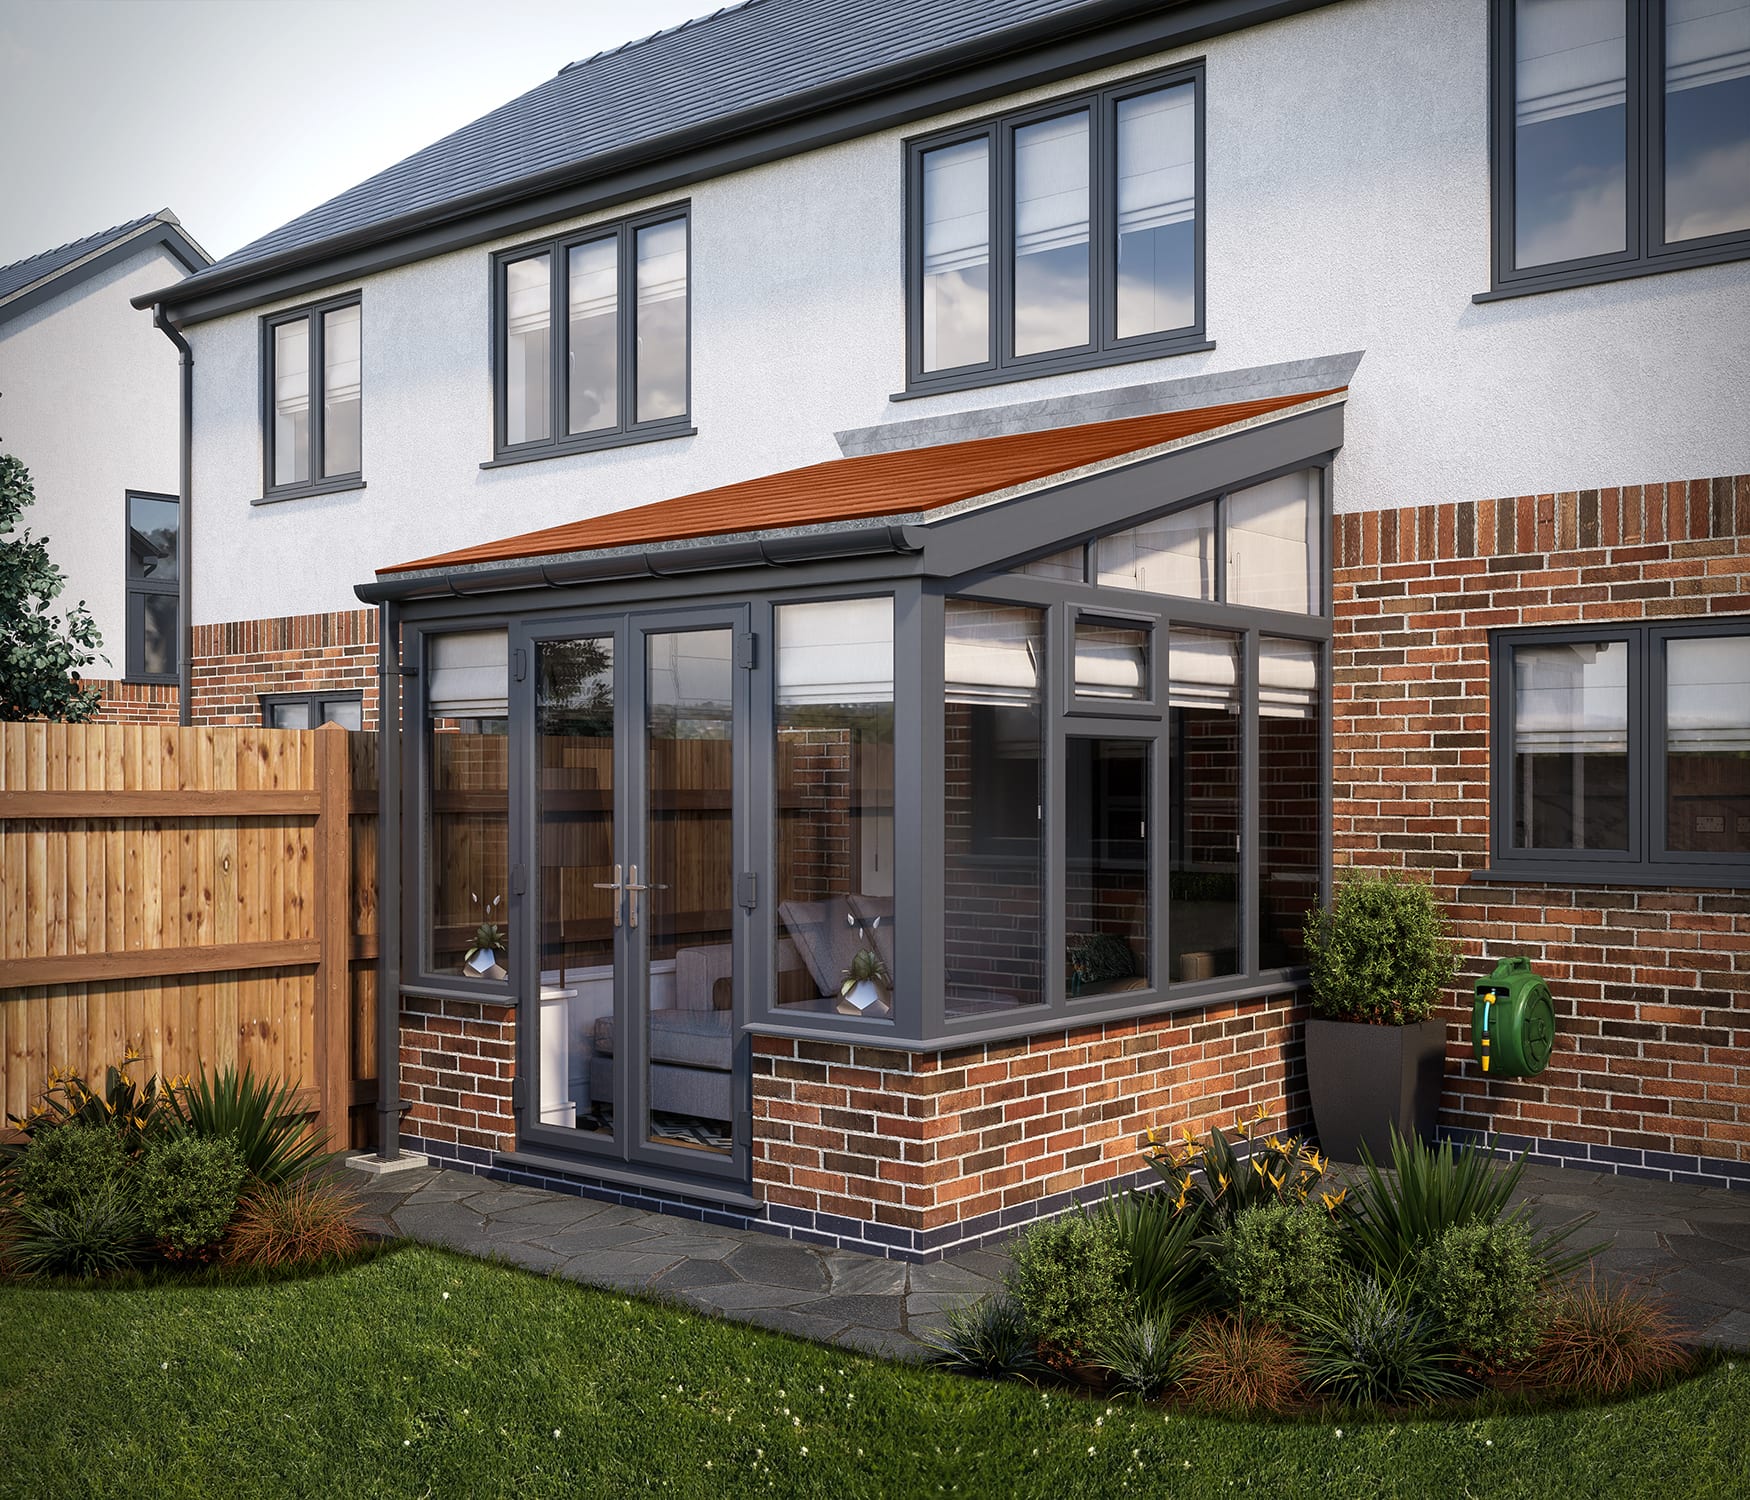 SOLid roof Lean to Conservatory Grey Frames Dwarf